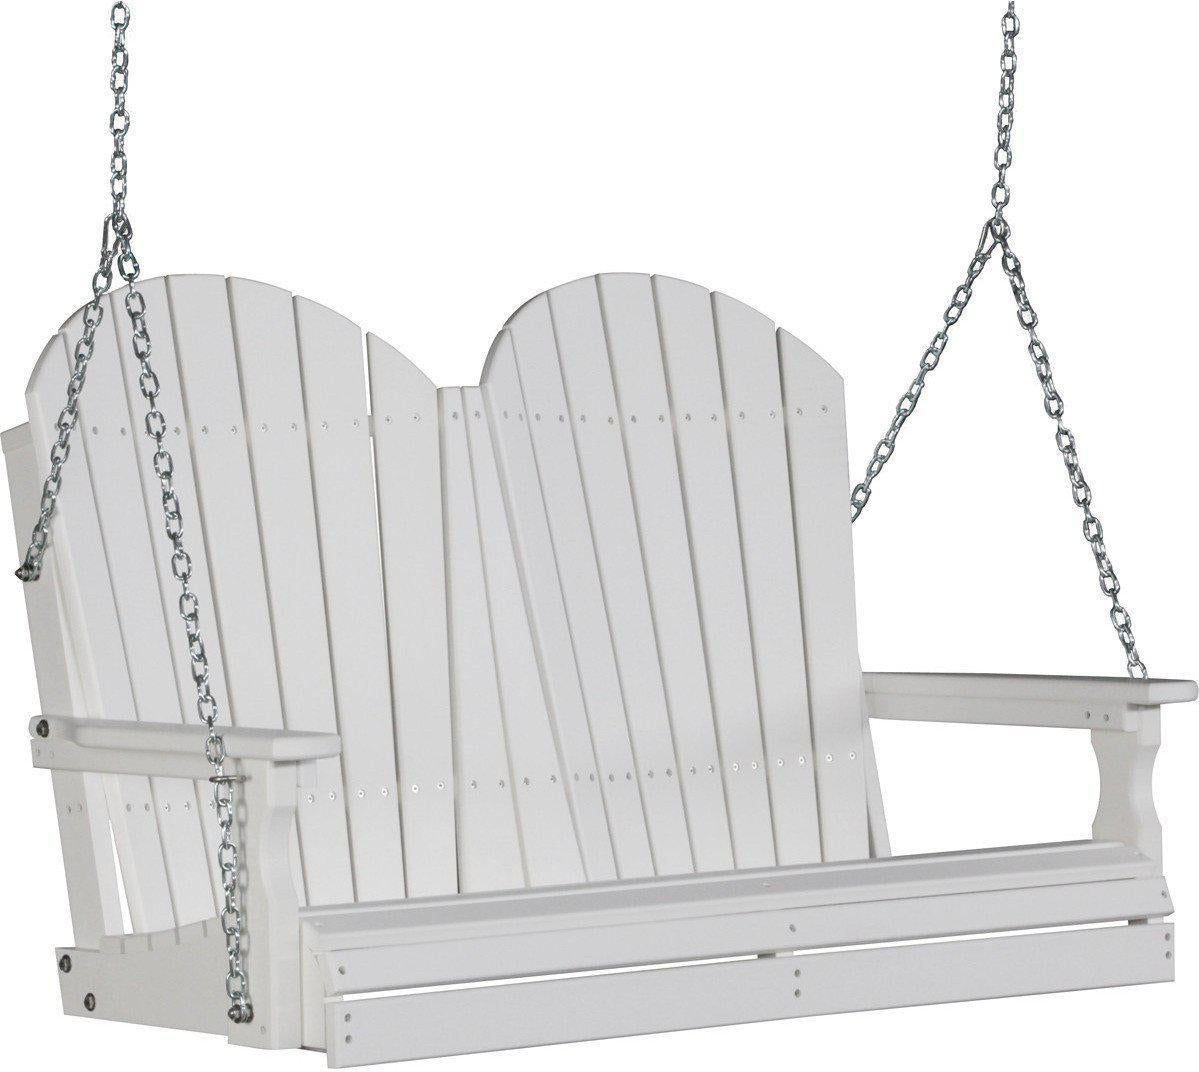 LuxCraft Adirondack 4ft. Recycled Plastic Porch Swing - White